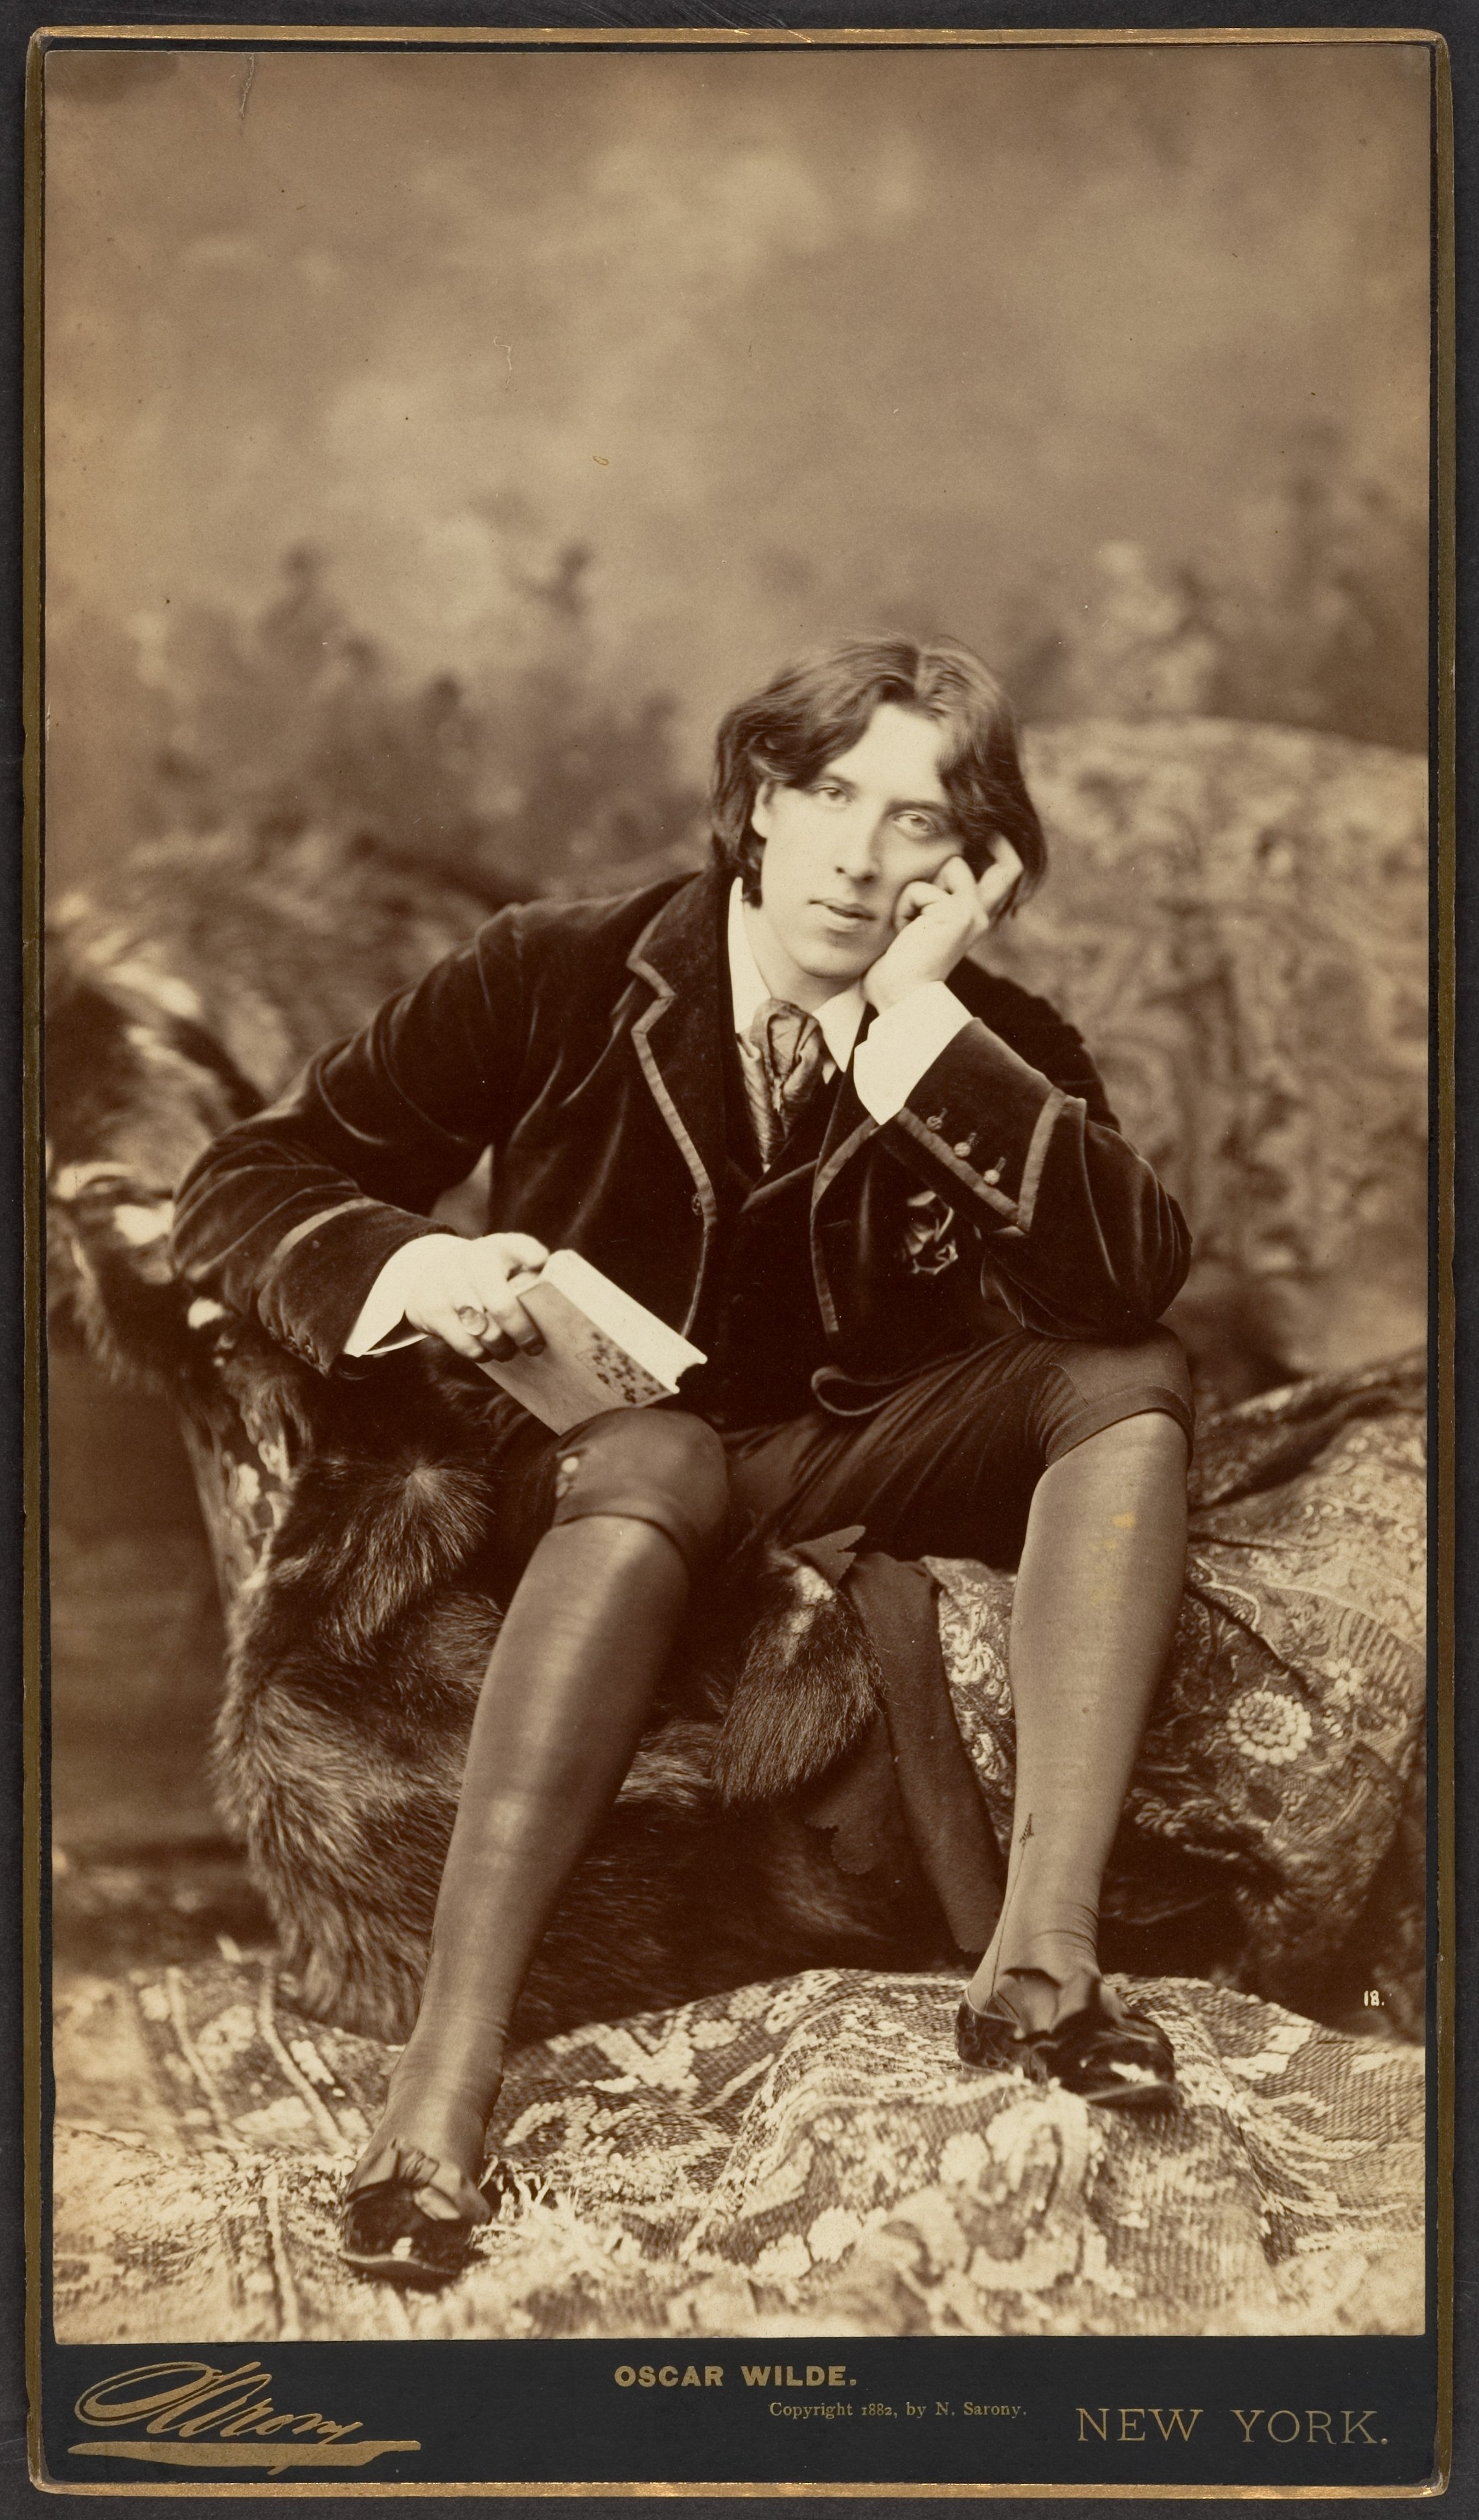 Oscar Wilde Portrait Returns To Uk After A Century – The History Blog